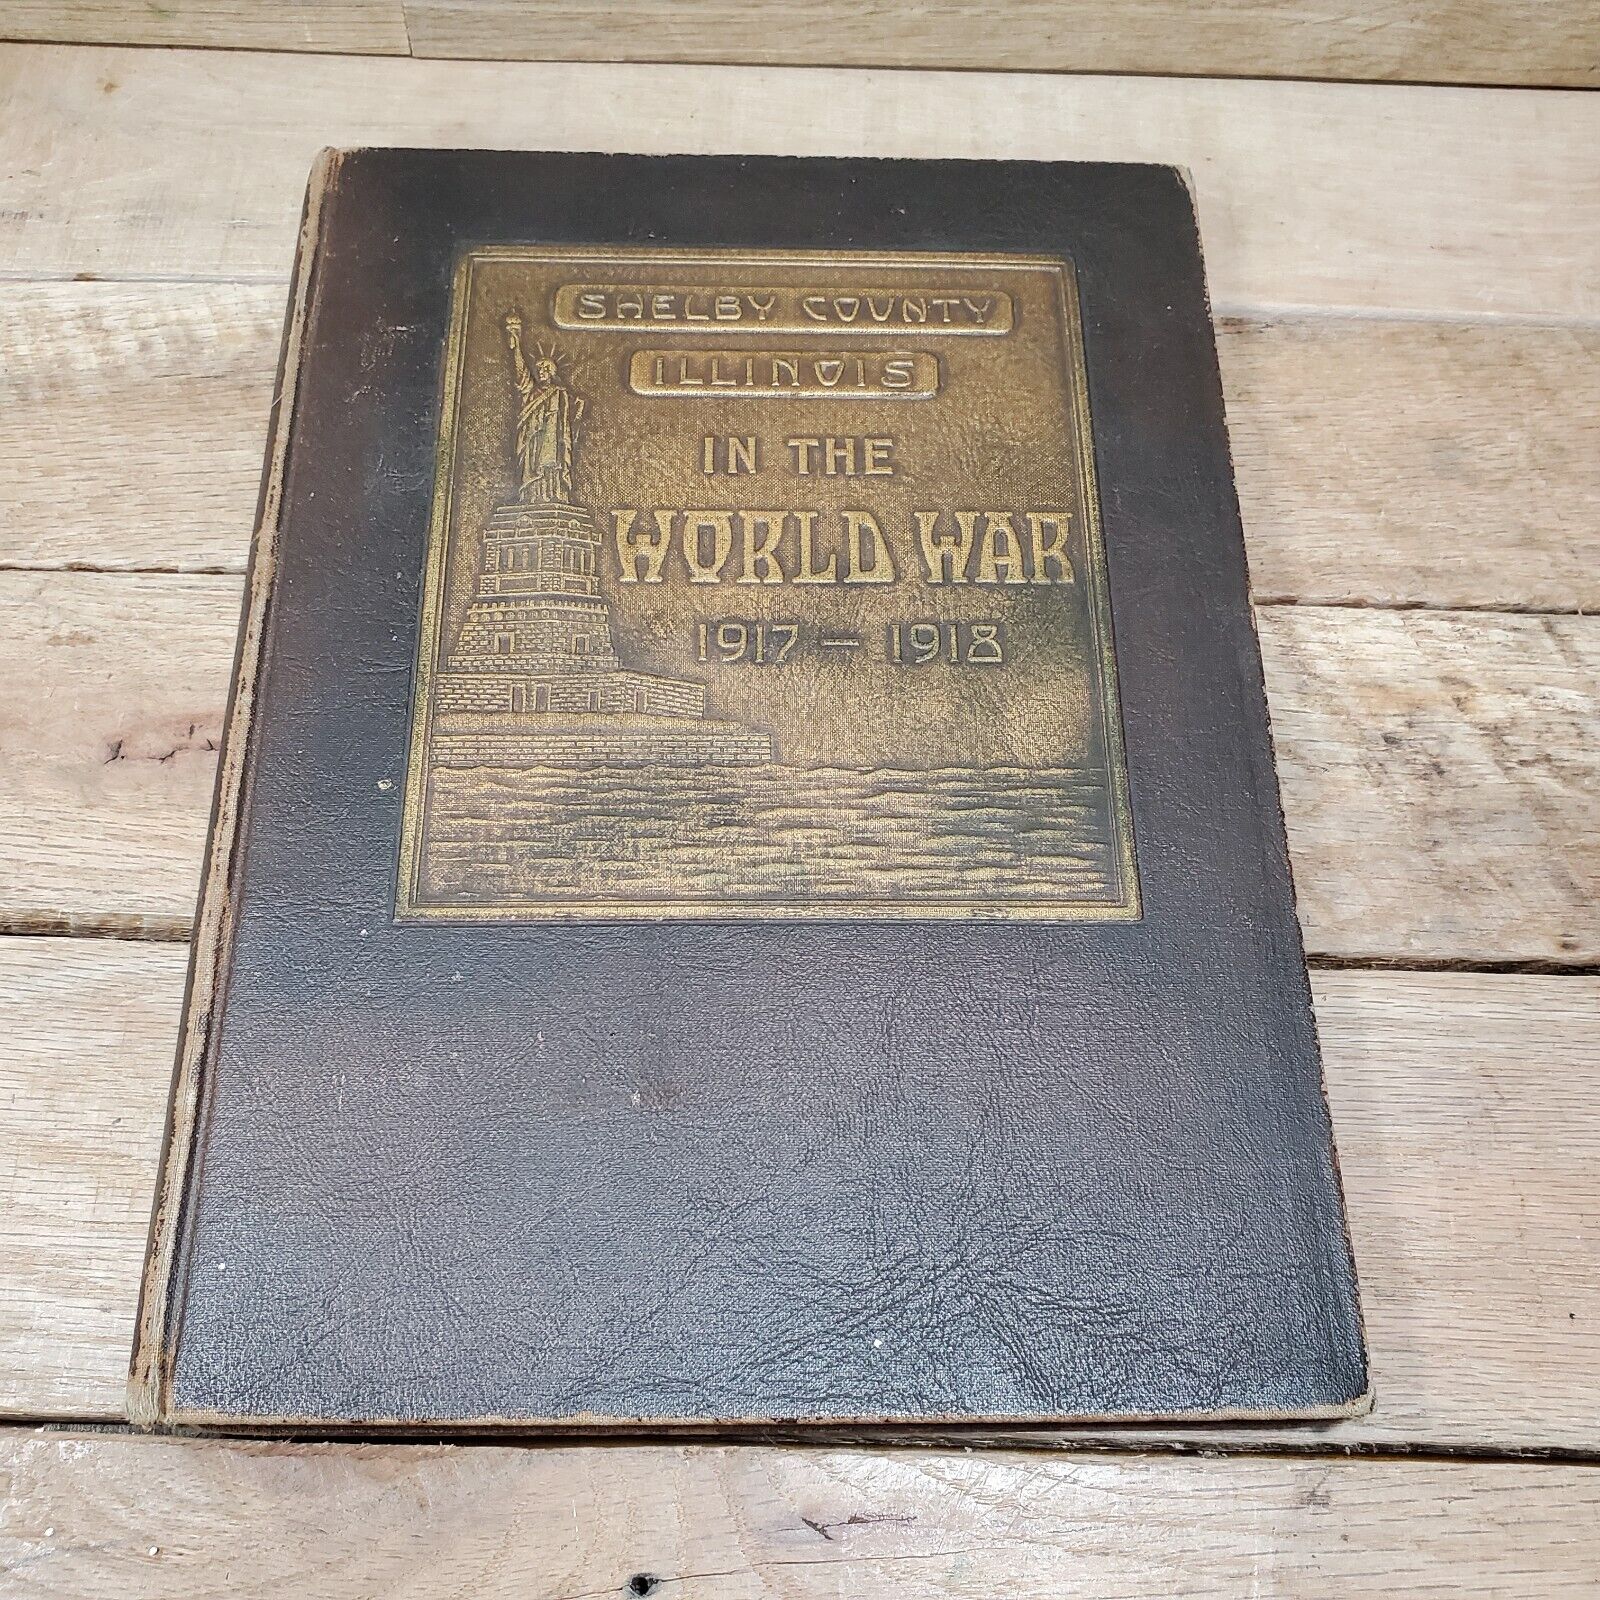 RARE 1919 WWI BOOK SHELBY COUNTY SHELBYVILLE ILLINOIS IN THE WORLD WAR